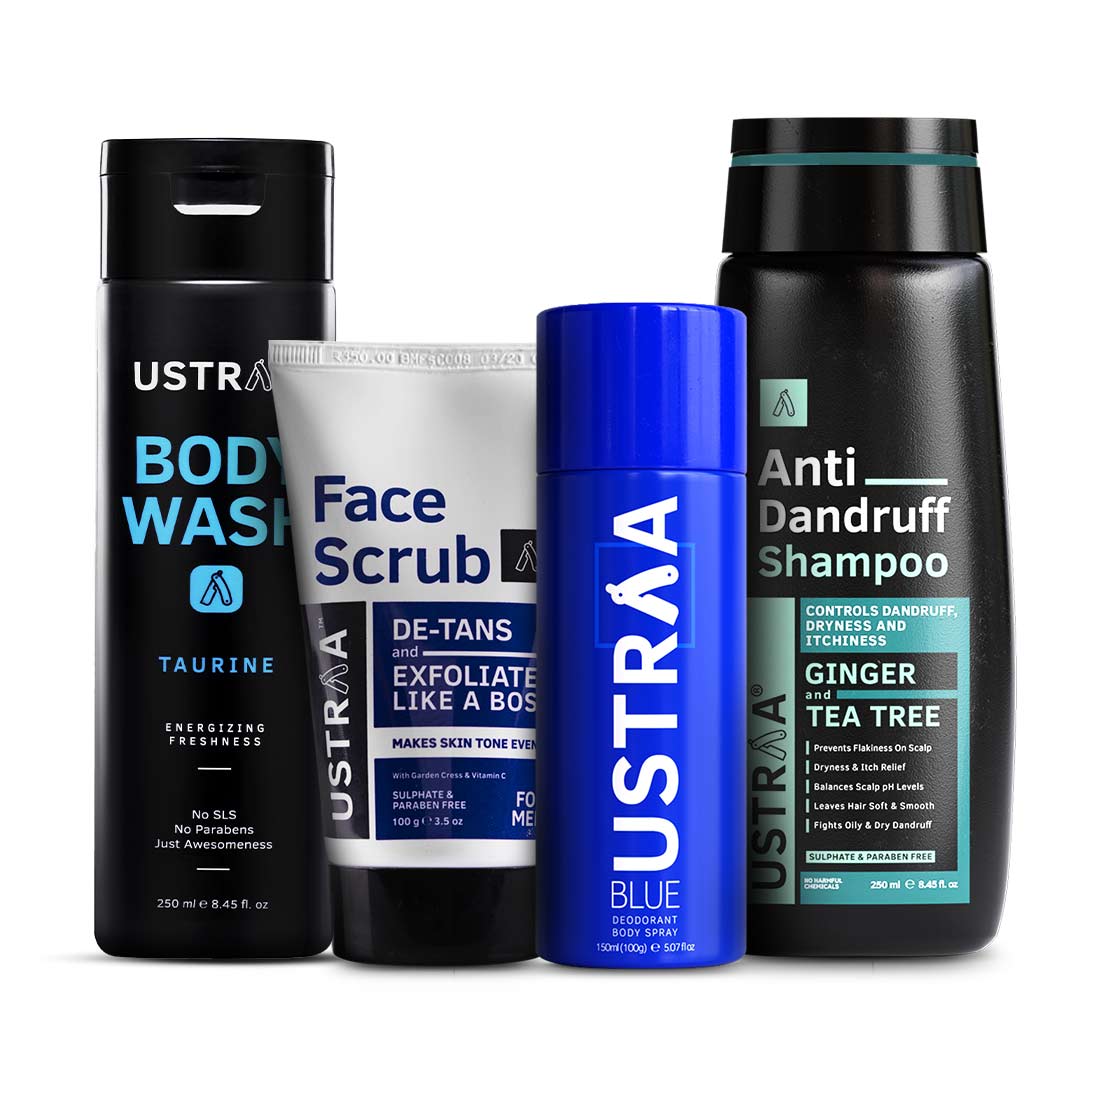 Ustraa Men Monthly Essential Kit (Pack of 4): Deo Blue, De-Tan Face Scrub, Anti-dandruff Shampoo, and Body Wash Taurine